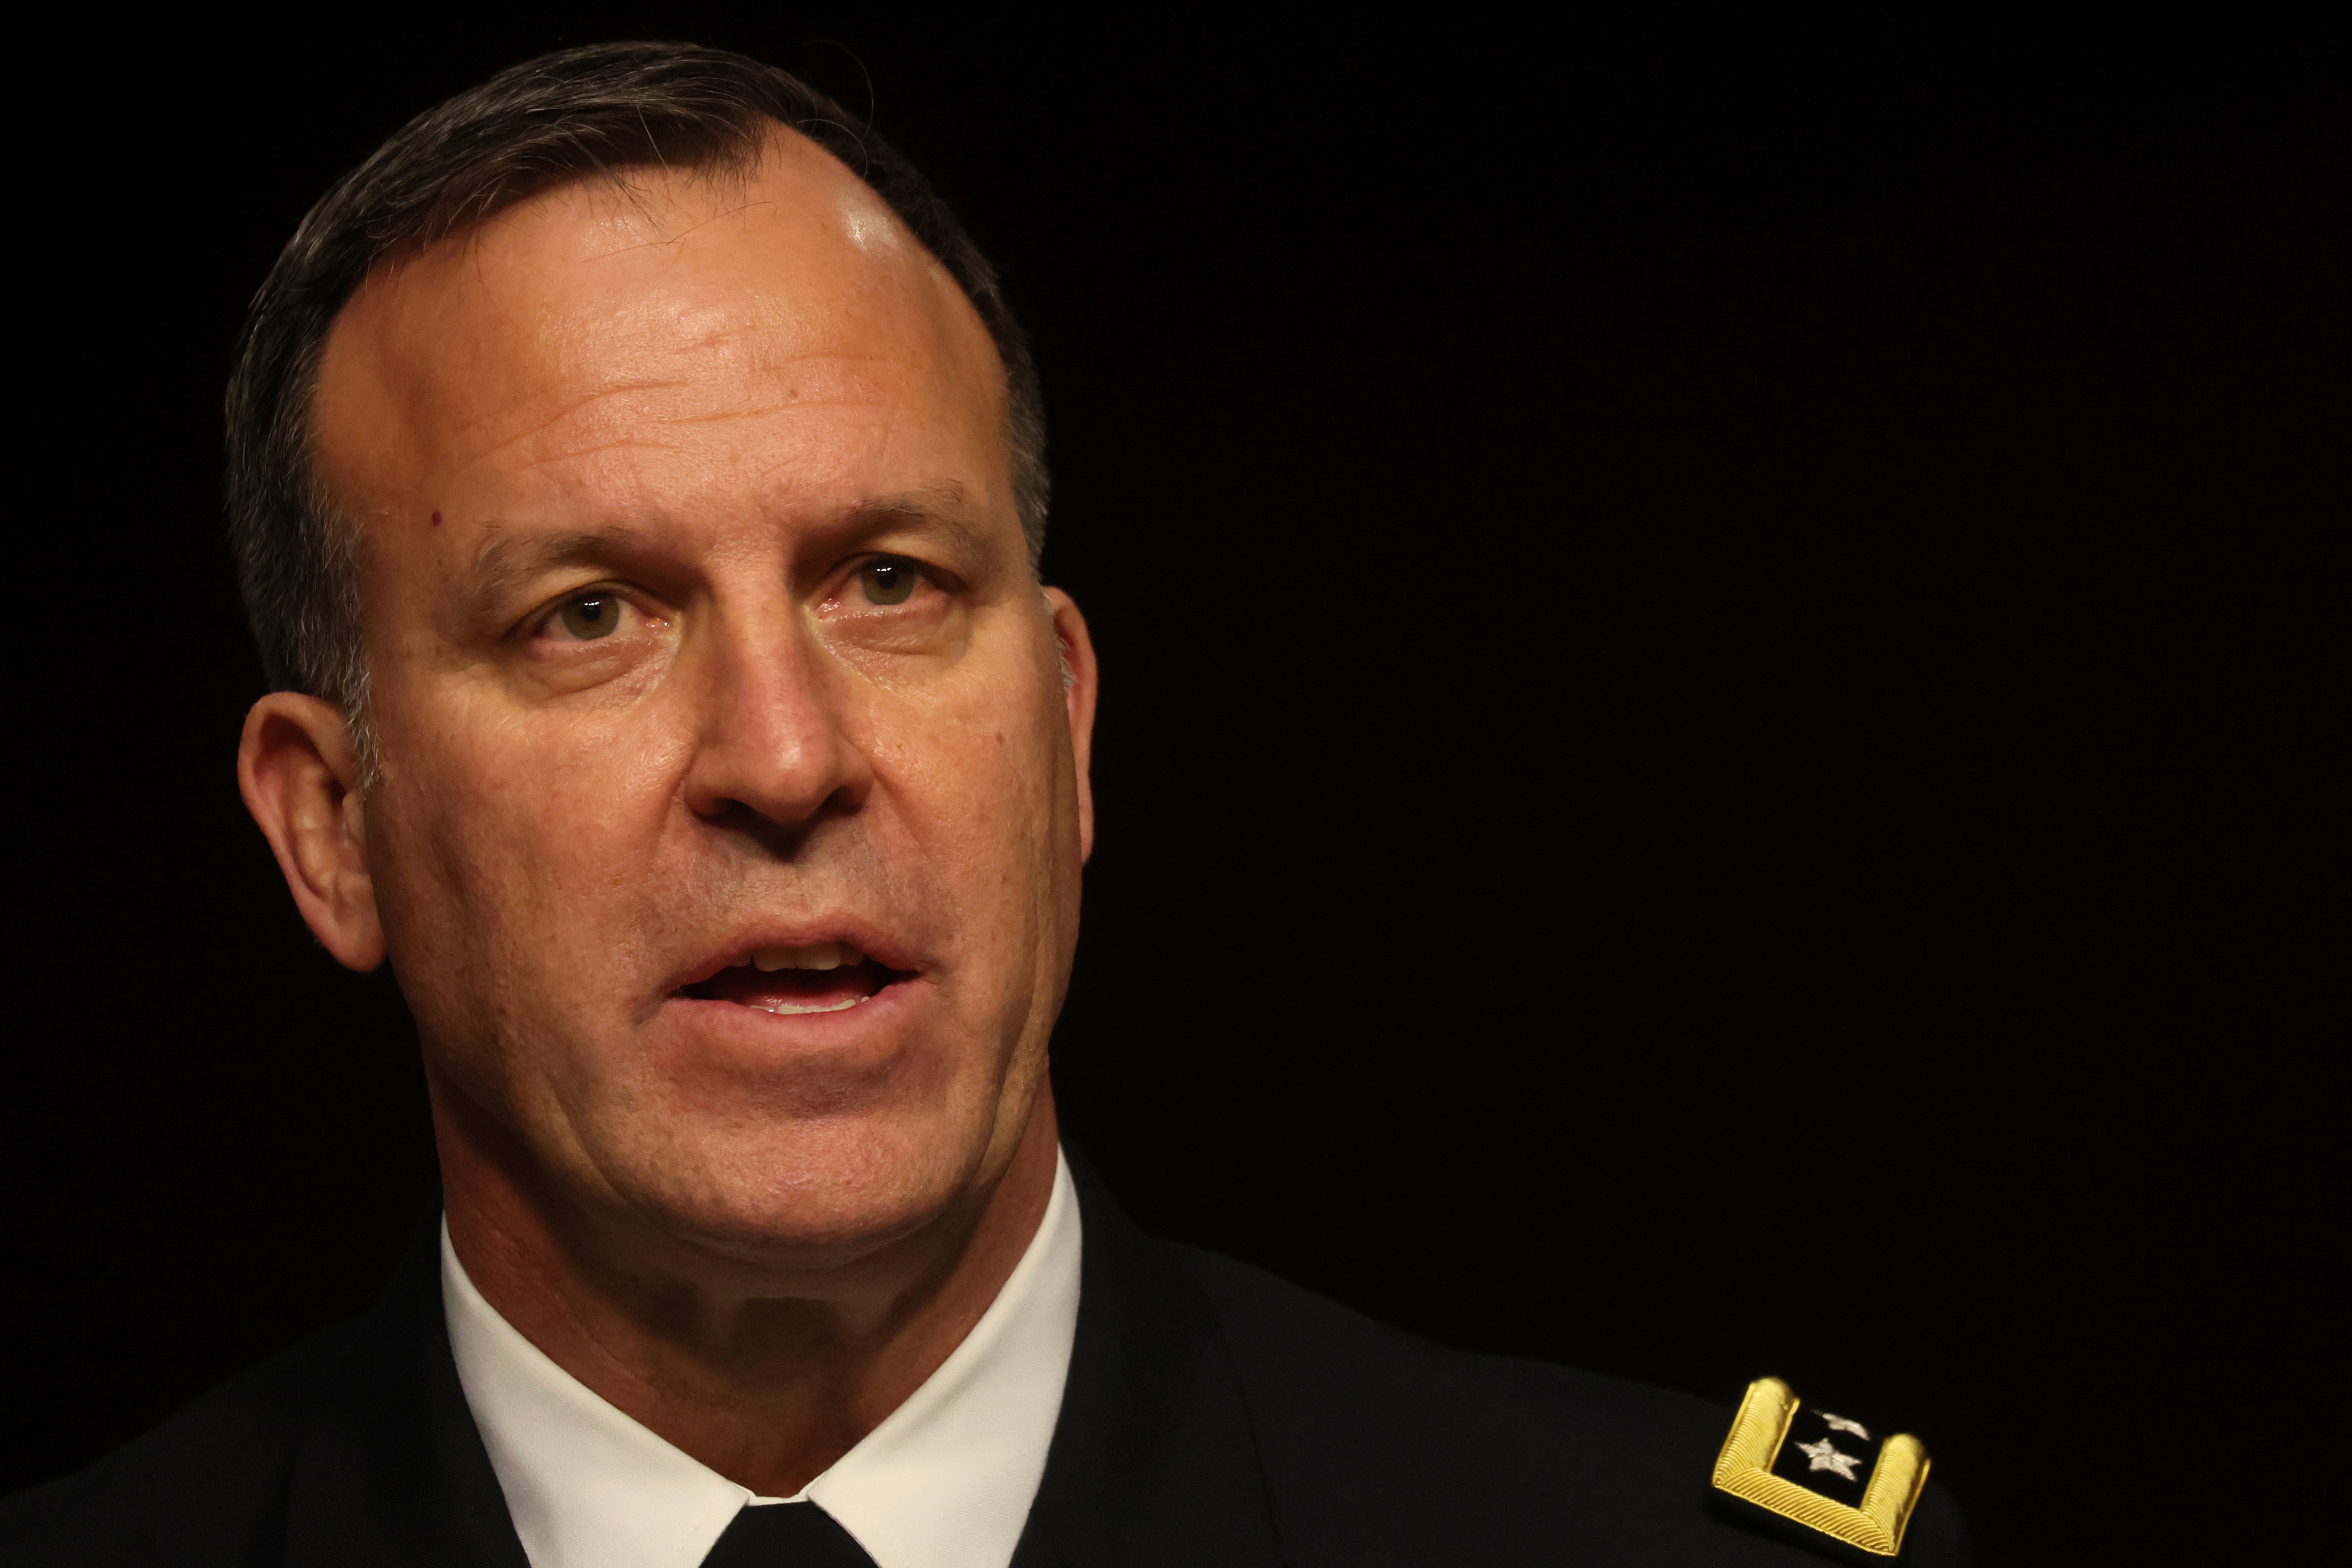 Lieutenant General Kurilla testifies before Senate Armed Services Committee hearing on Capitol Hill in Washington